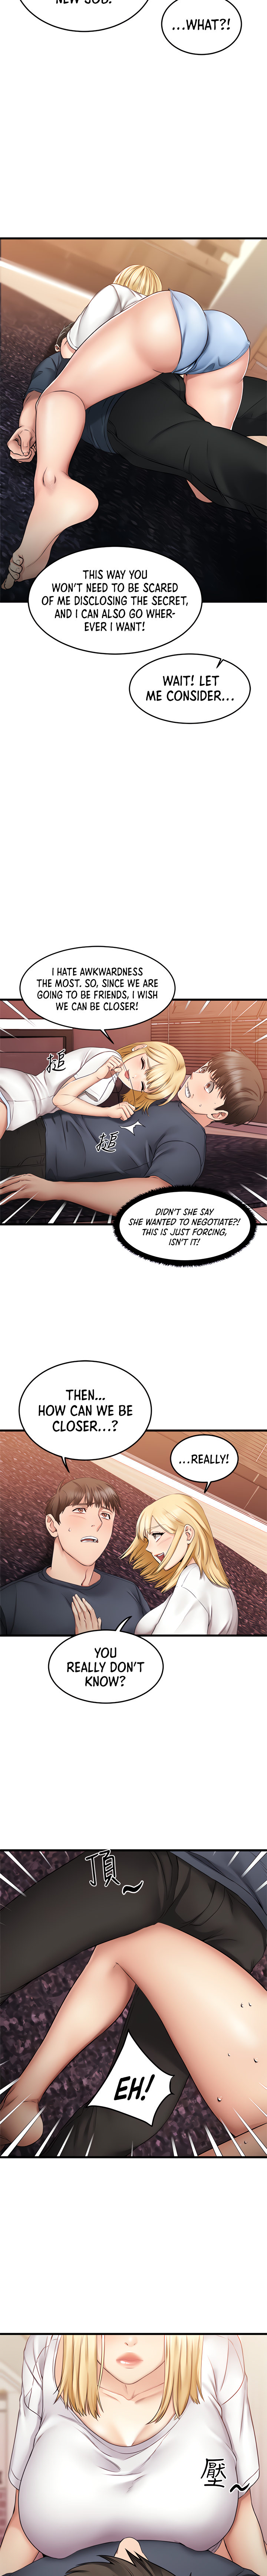 My Female Friend Who Crossed The Line - Chapter 5 Page 13